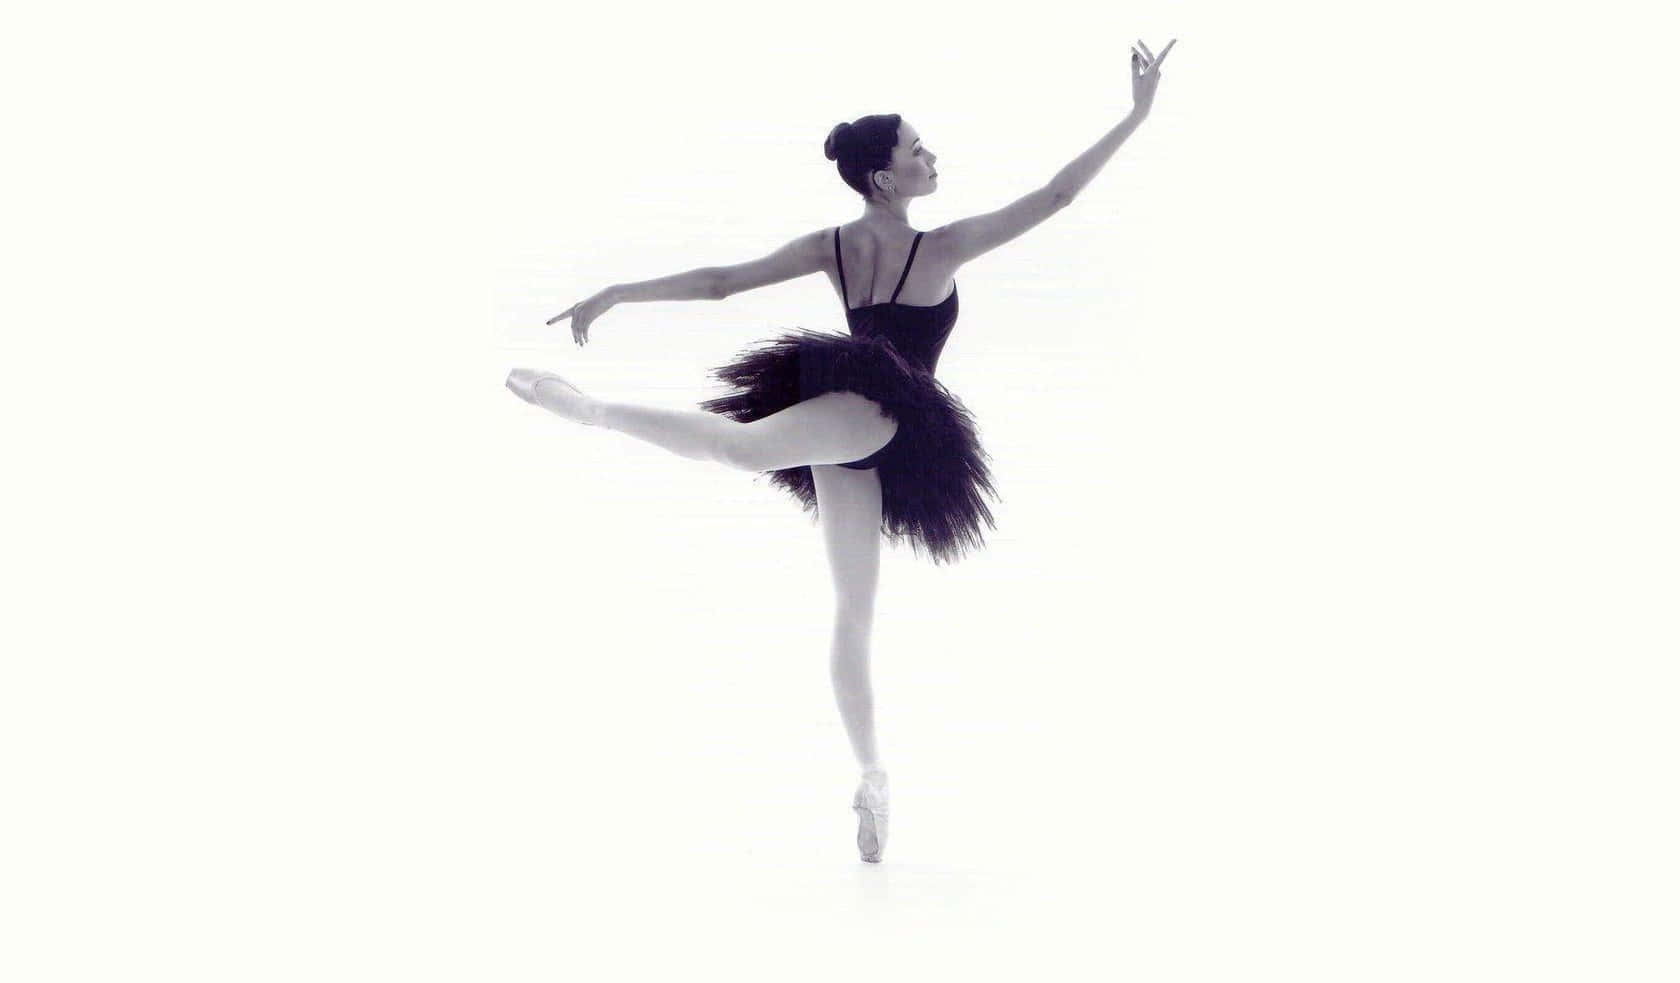 Enthralling Black And White Image Of Ballerina In Arabesque Pose